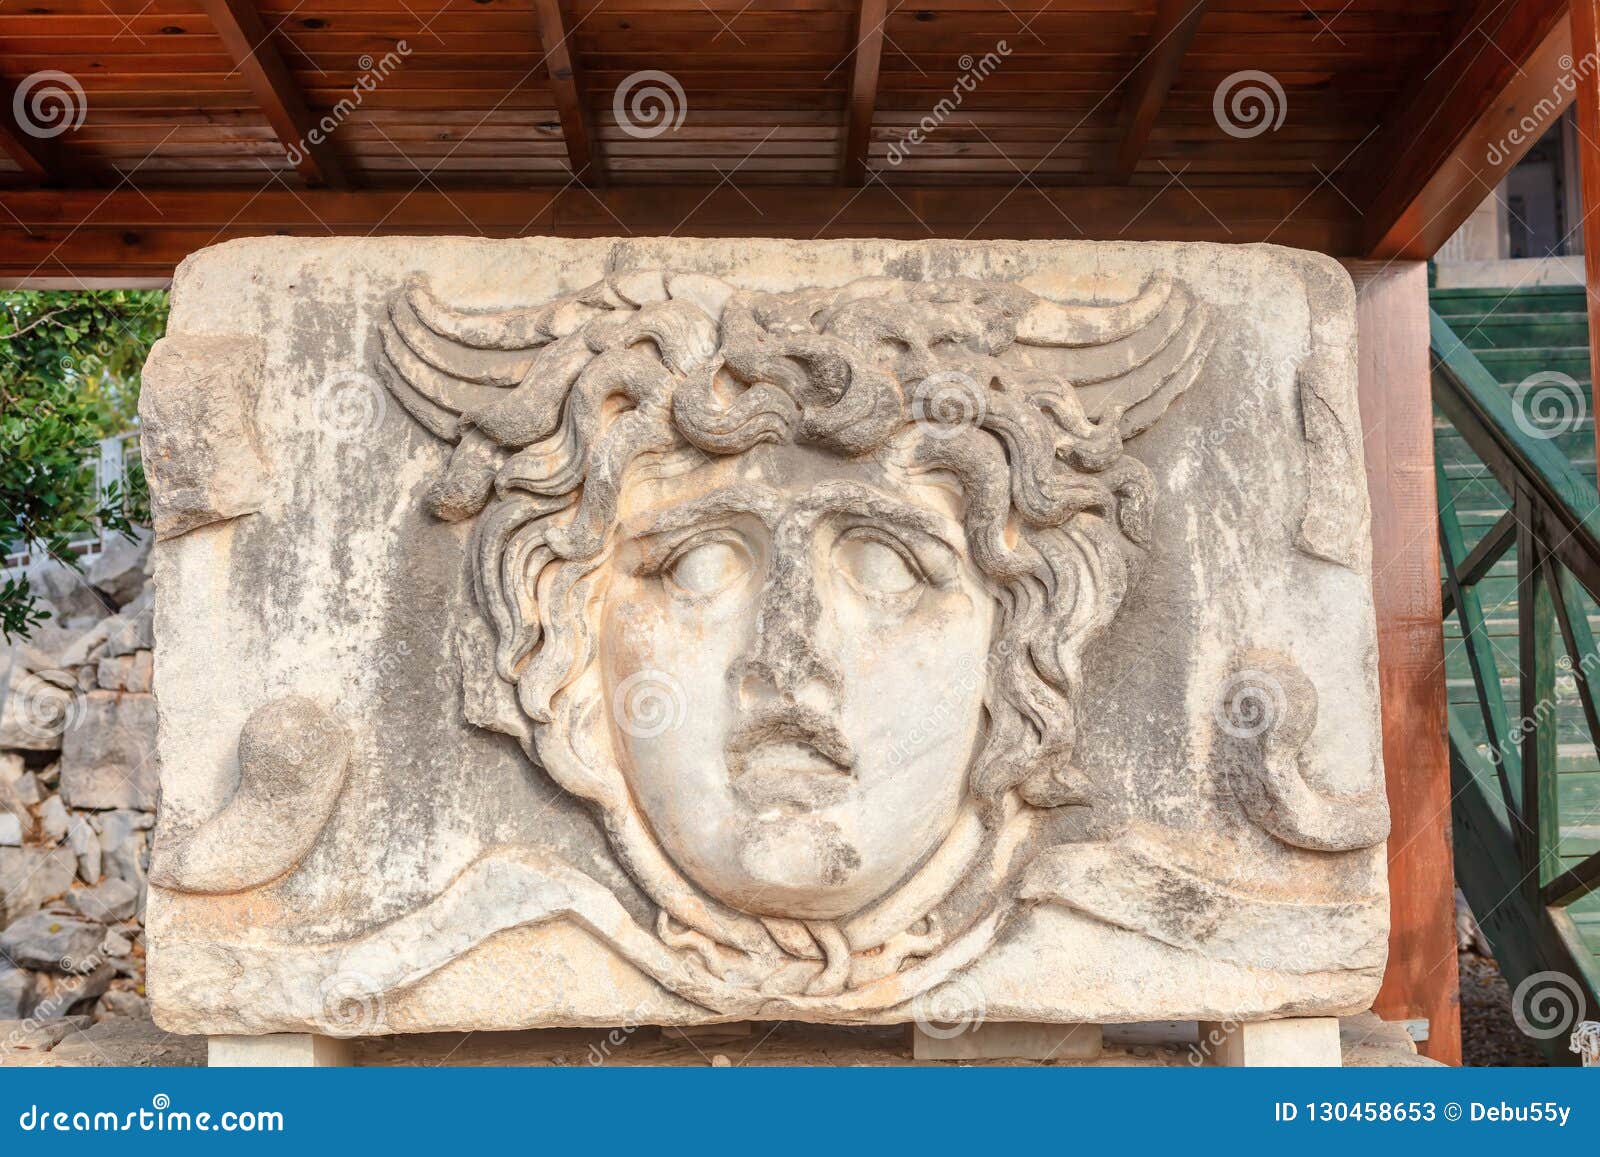 marble tablet with ancient stone carving of medusa head.